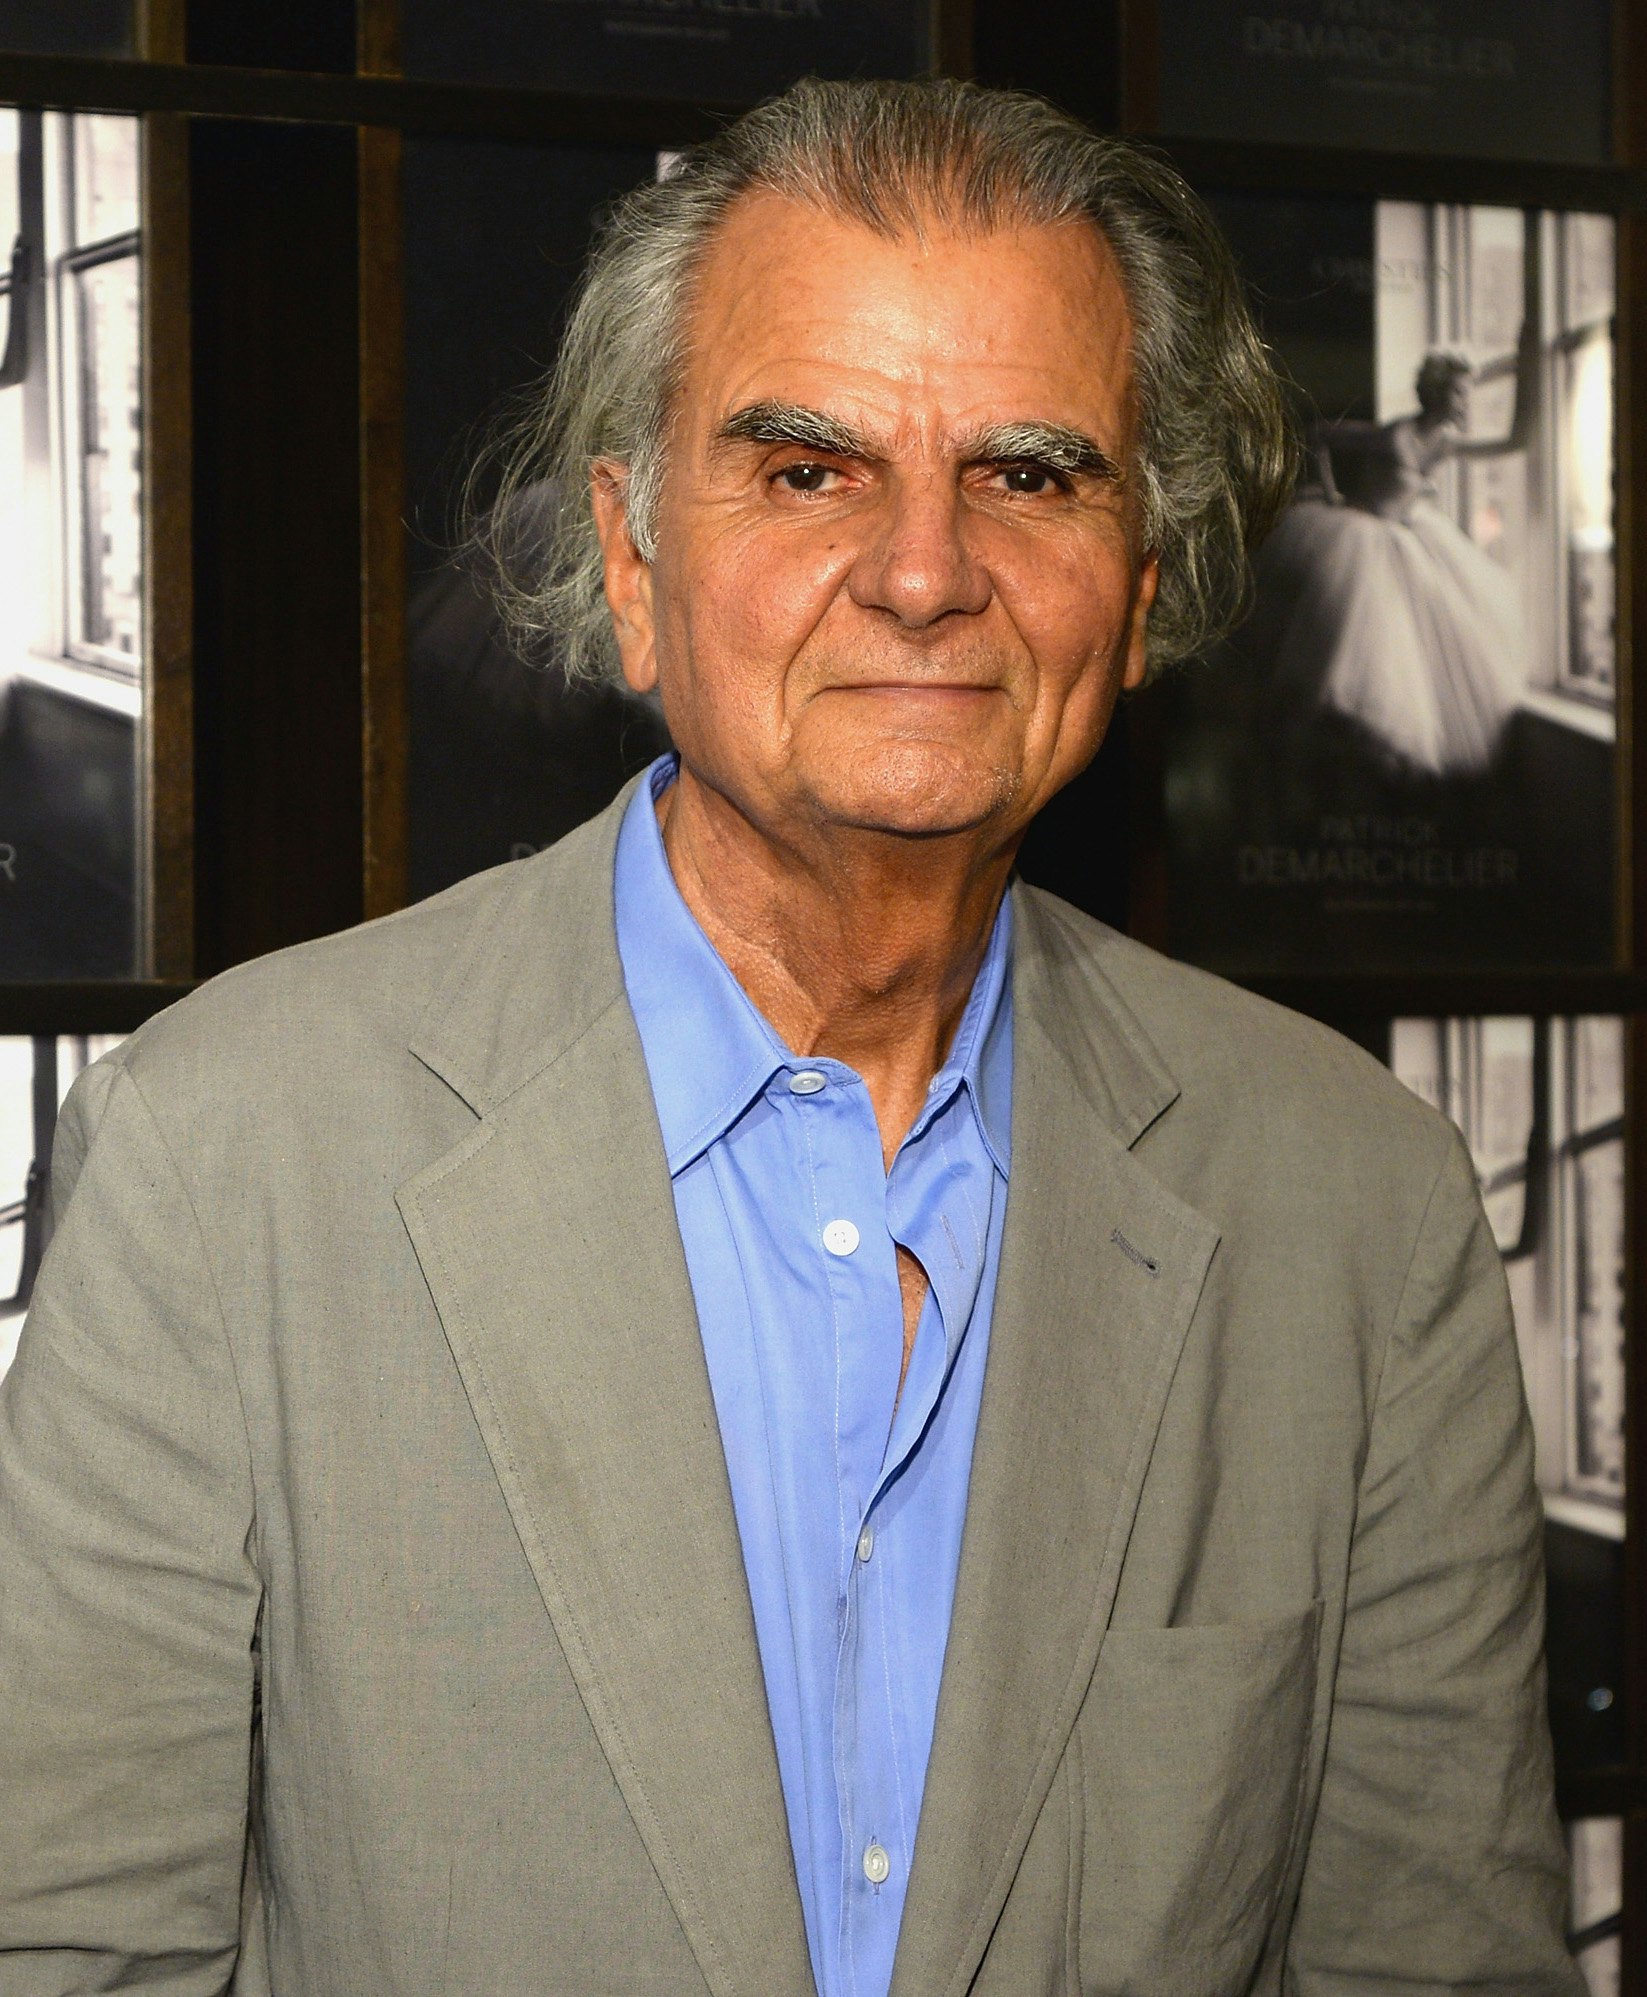 Fashion Photographer Patrick Demarchelier Has Died at 78